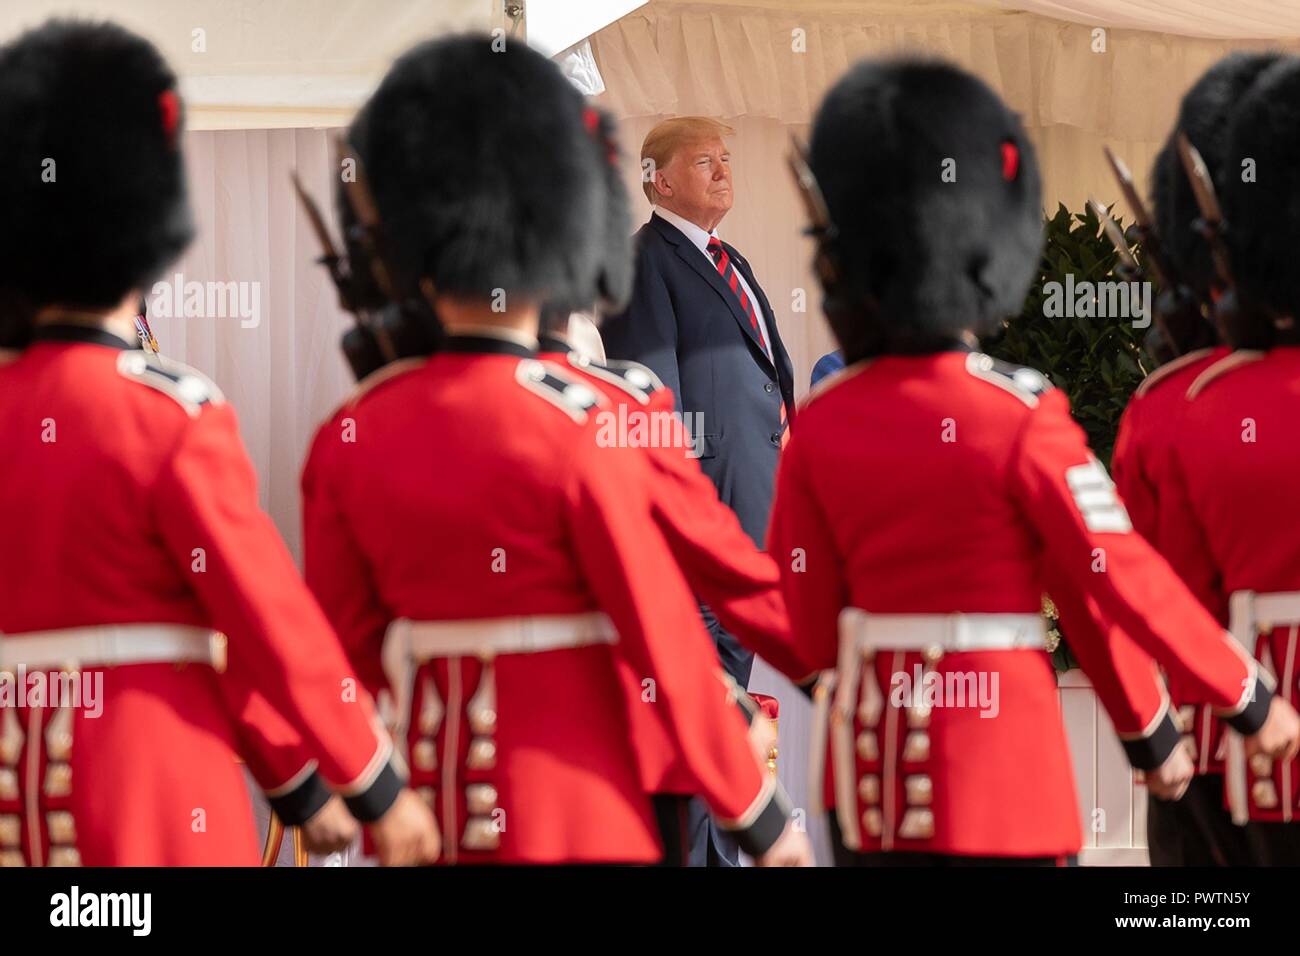 U.S President Donald Trump watches the review of troops during the formal arrival ceremony at Windsor Castle July 13, 2018 in Windsor, United Kingdom. Stock Photo